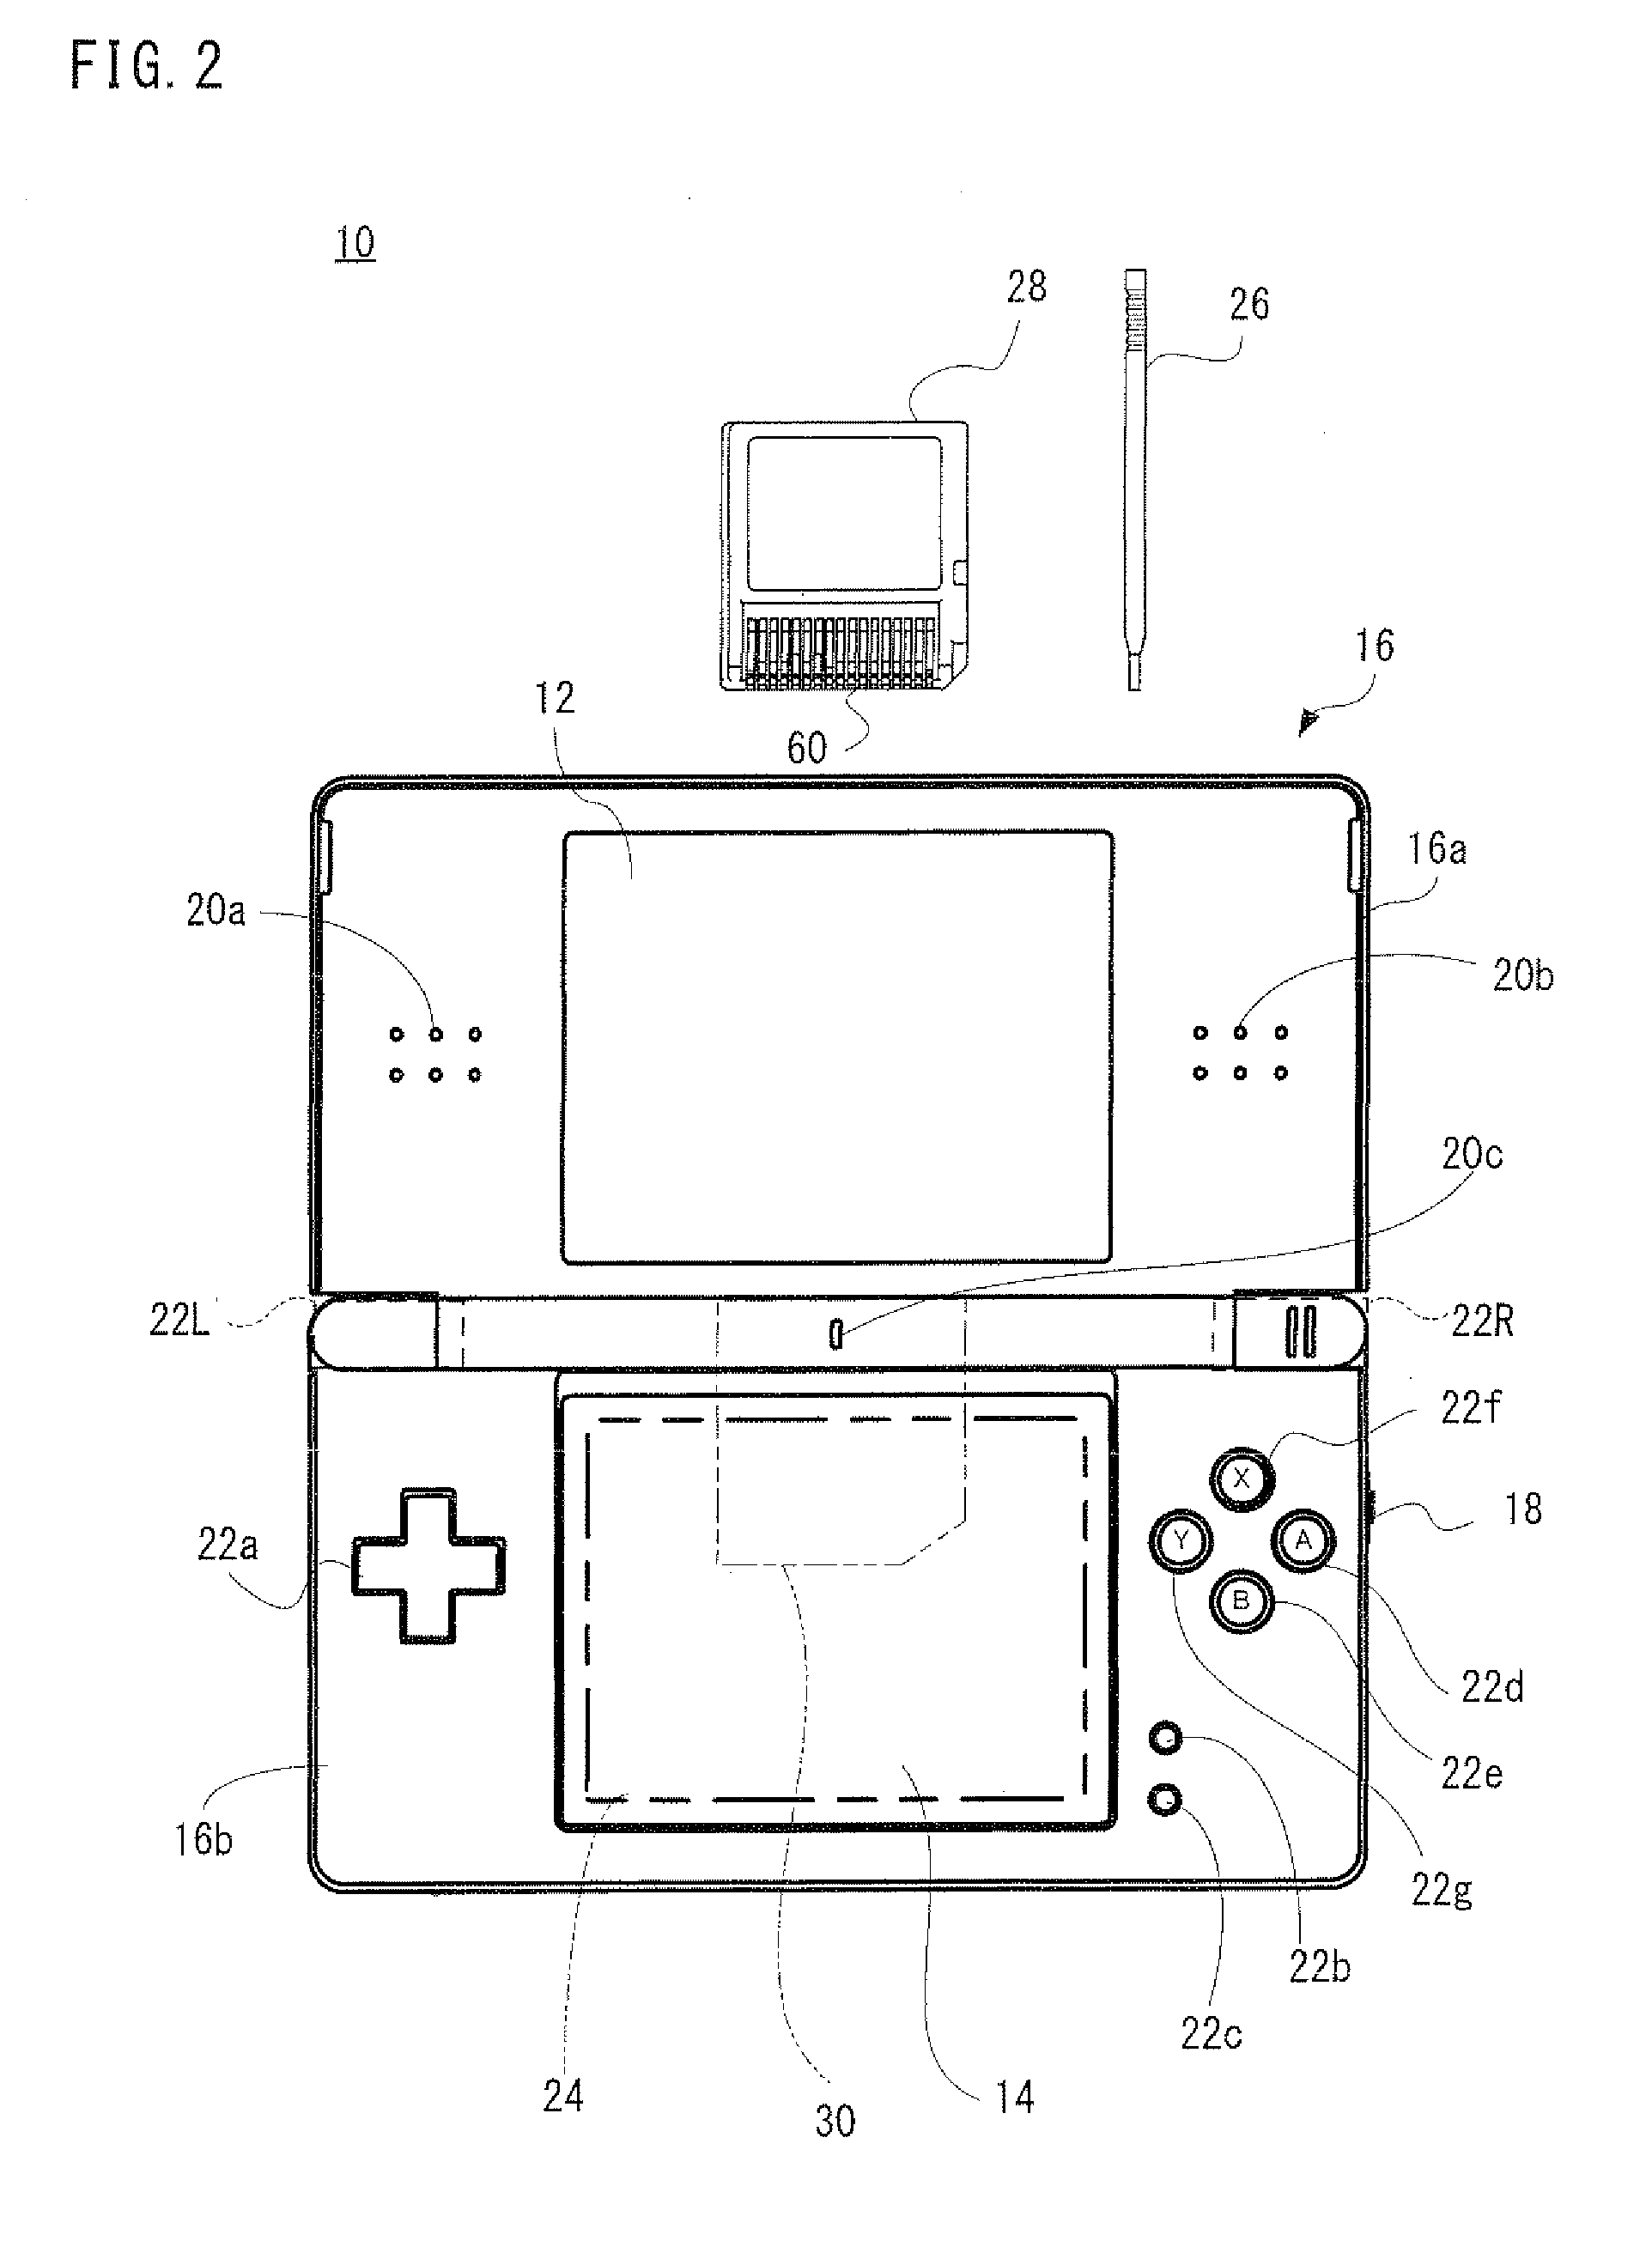 Game system